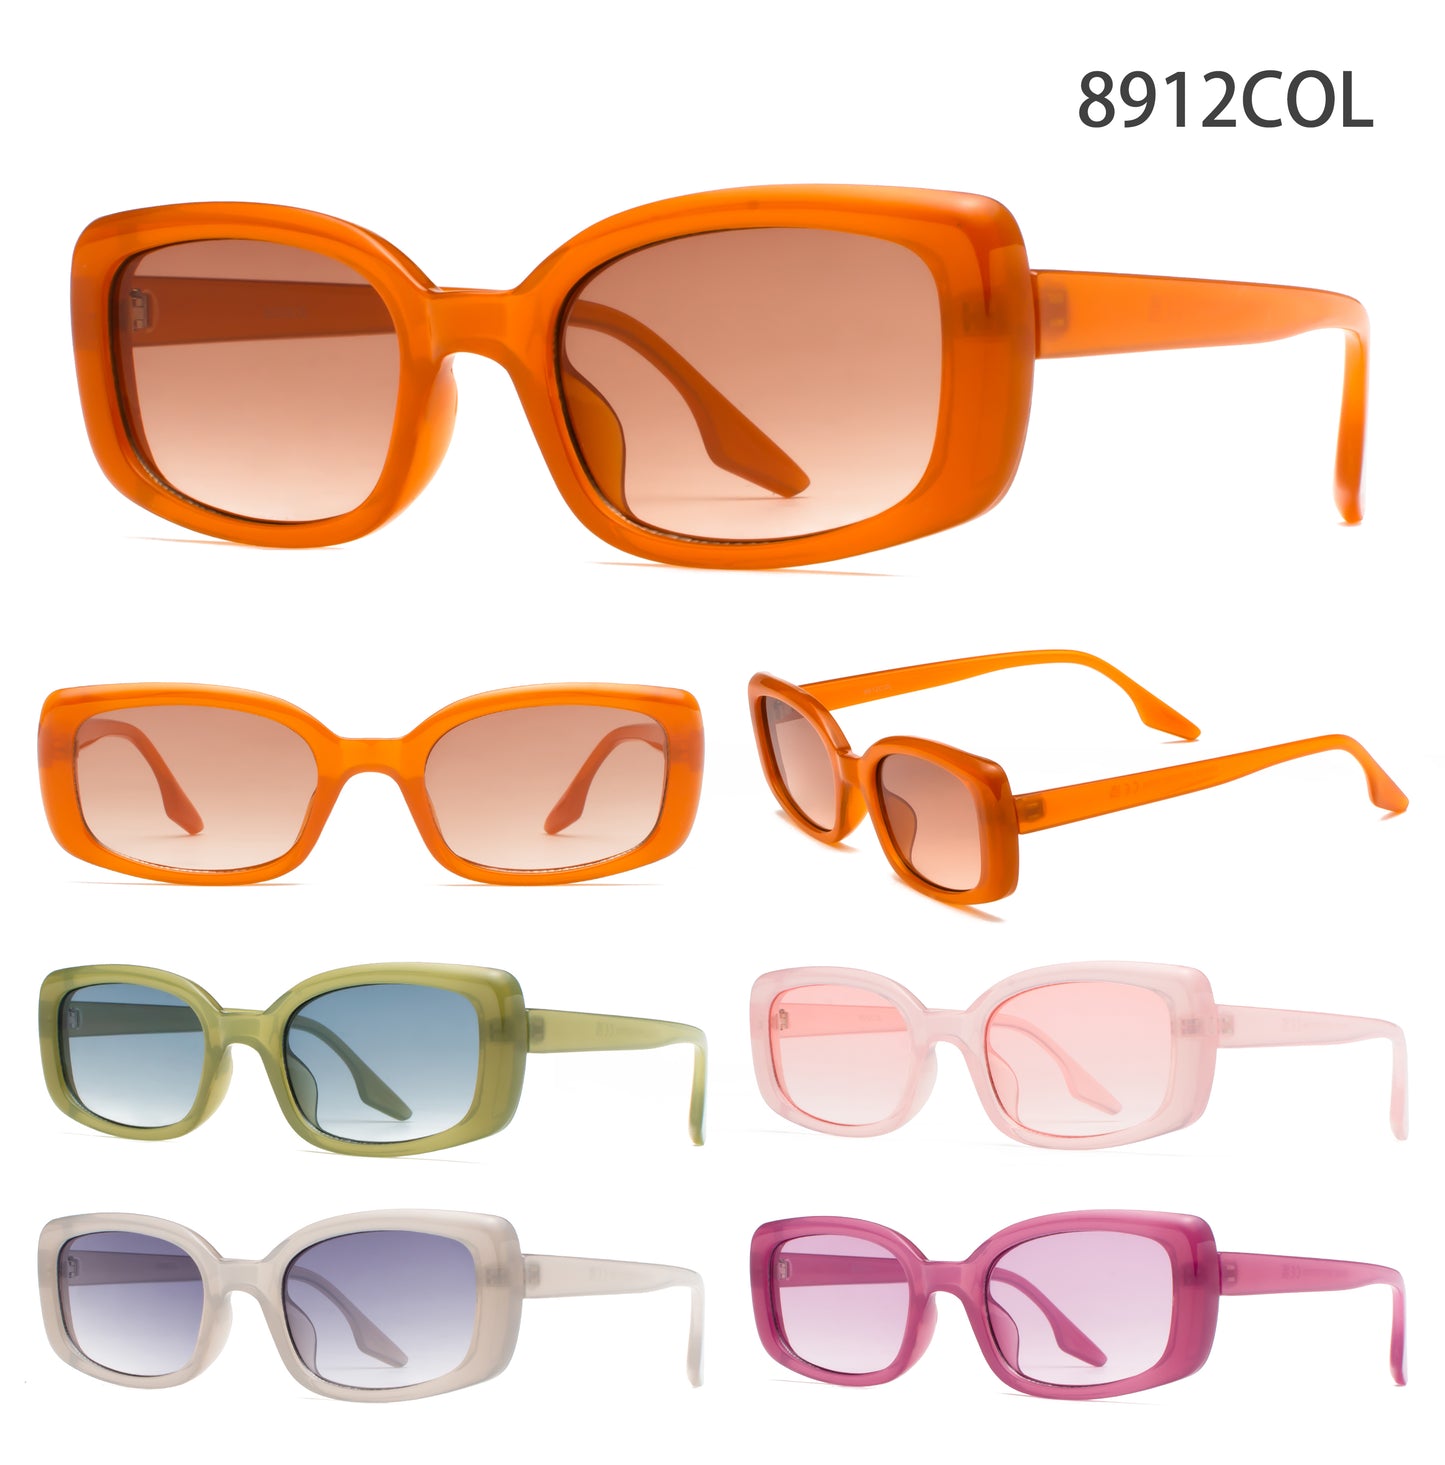 8912 Color - Rectangular Plastic Colorful Sunglasses with Flat Lens